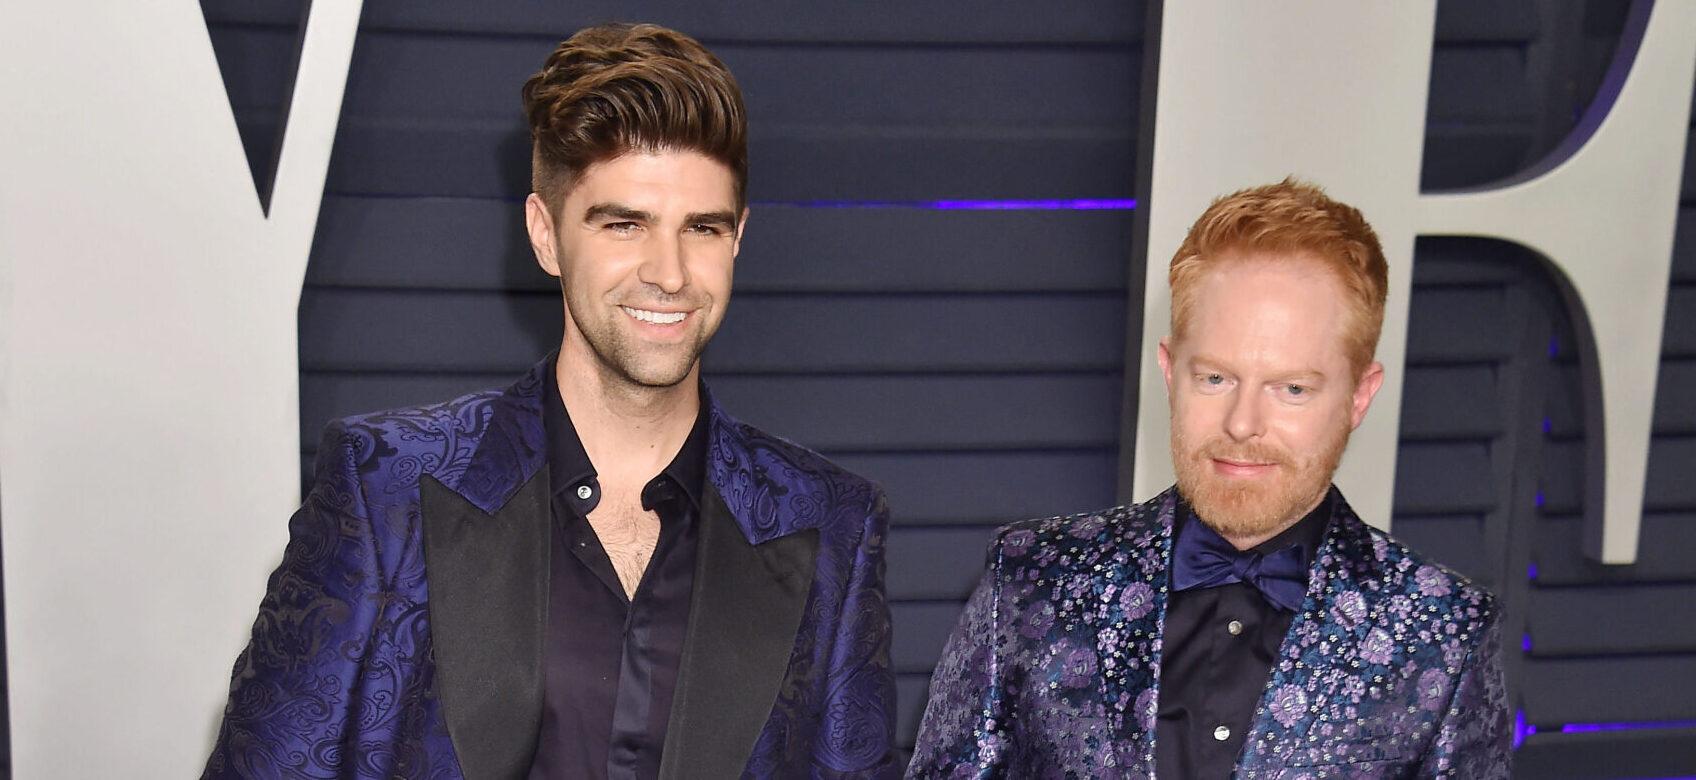 Jesse Tyler Ferguson and Justin Mikita at the 2019 Vanity Fair Oscar Party Hosted By Radhika Jones - Arrivals